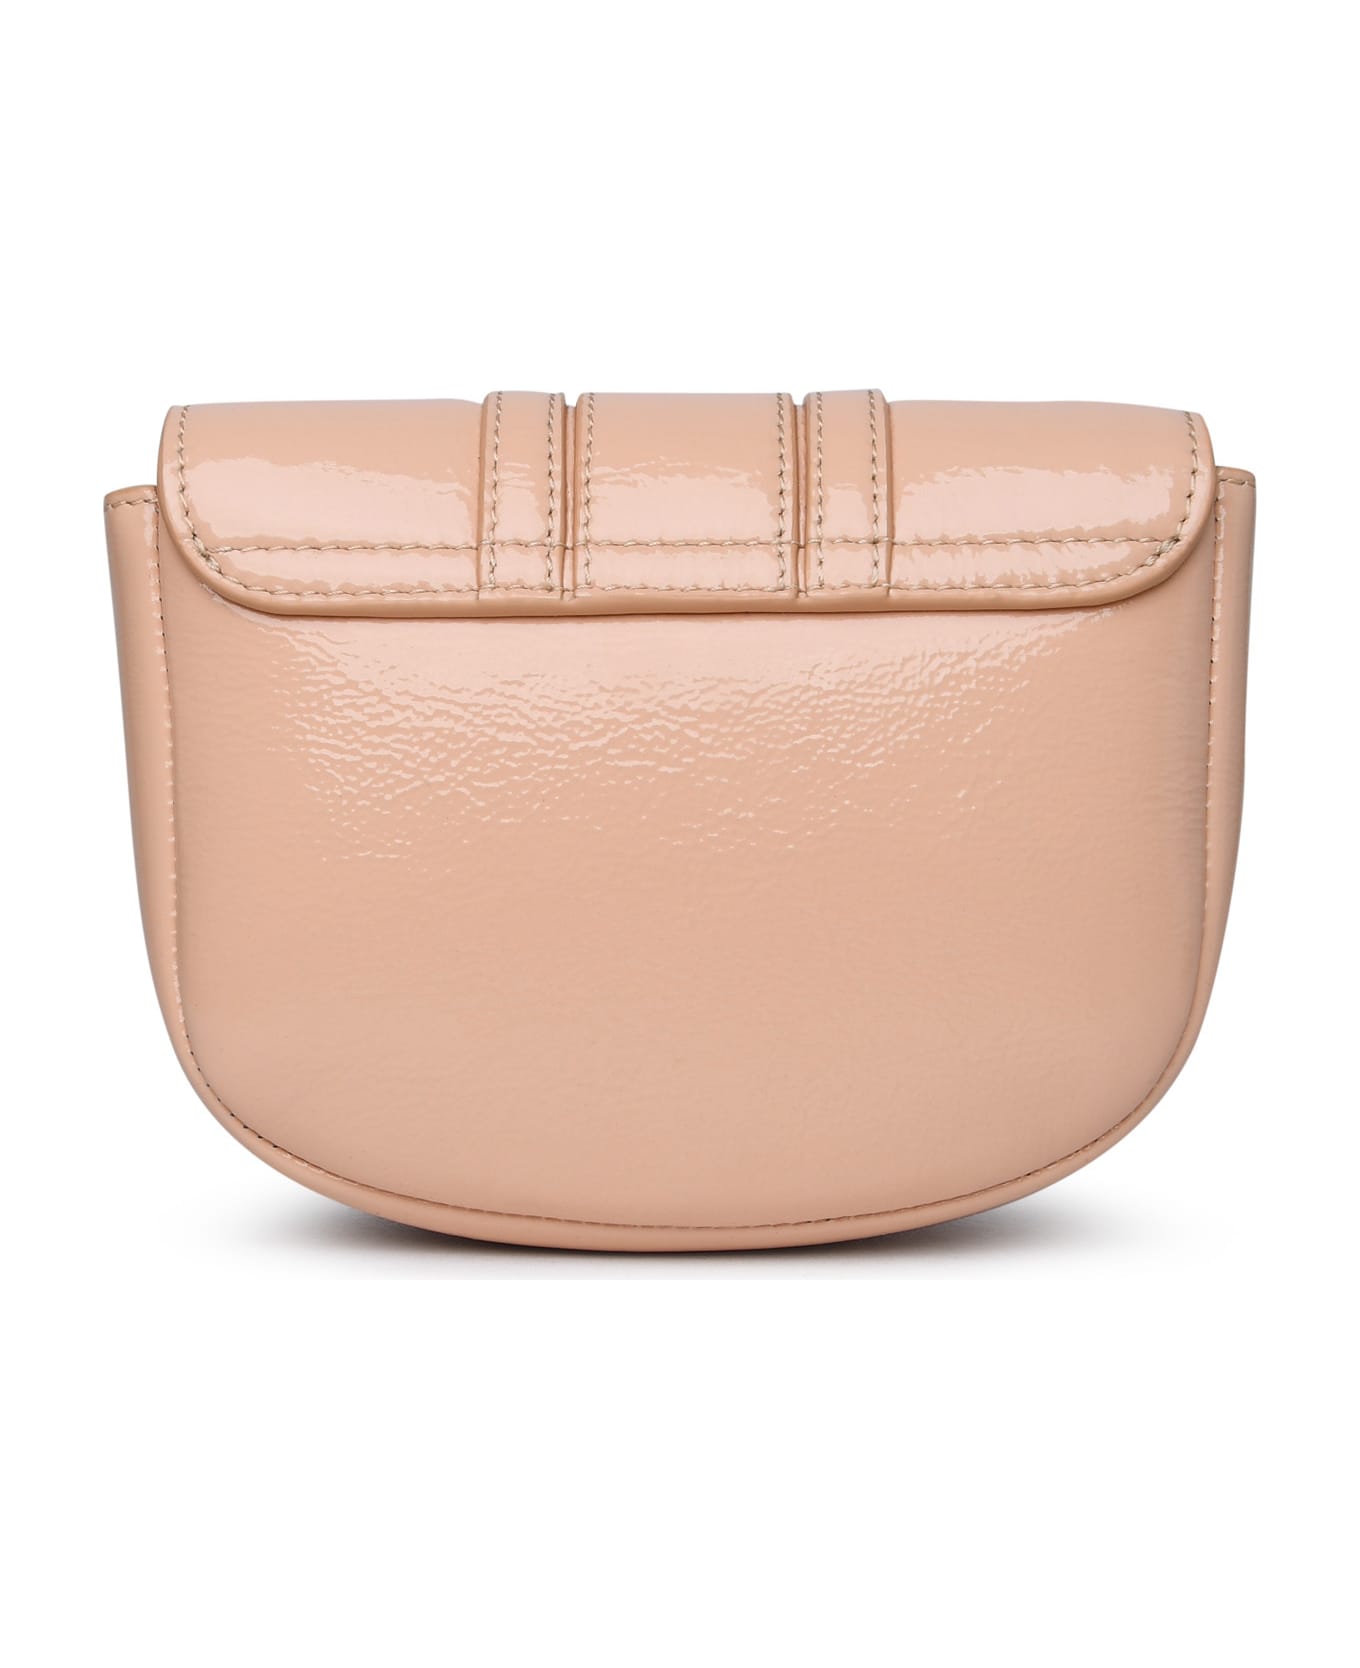 See by Chloé Pink Patent Leather Bag - Nude トートバッグ